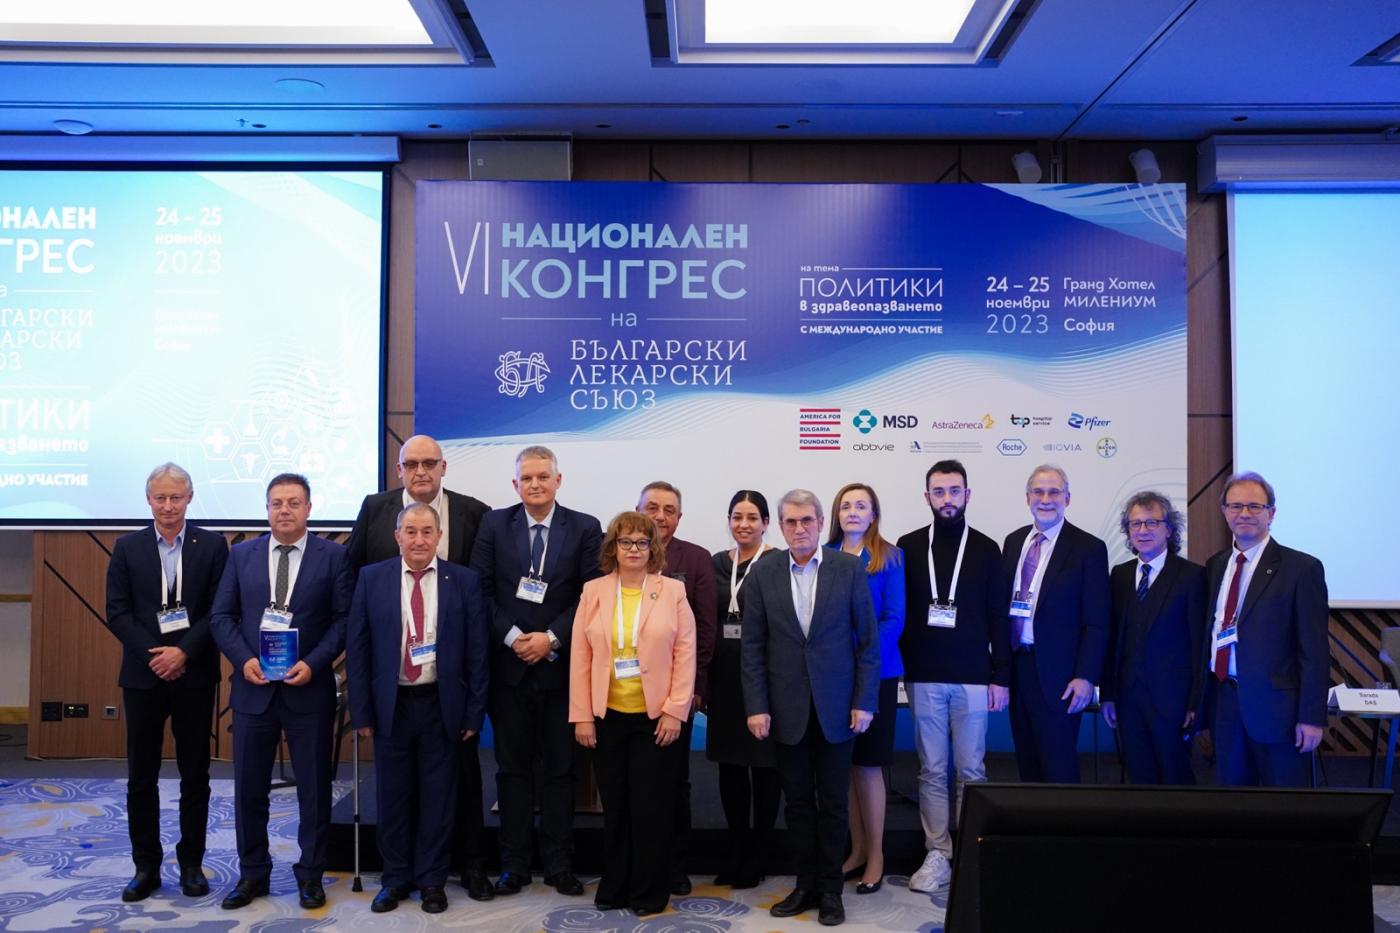 EJD presence at the VI National Congress of the Bulgarian Medical Association symbol image